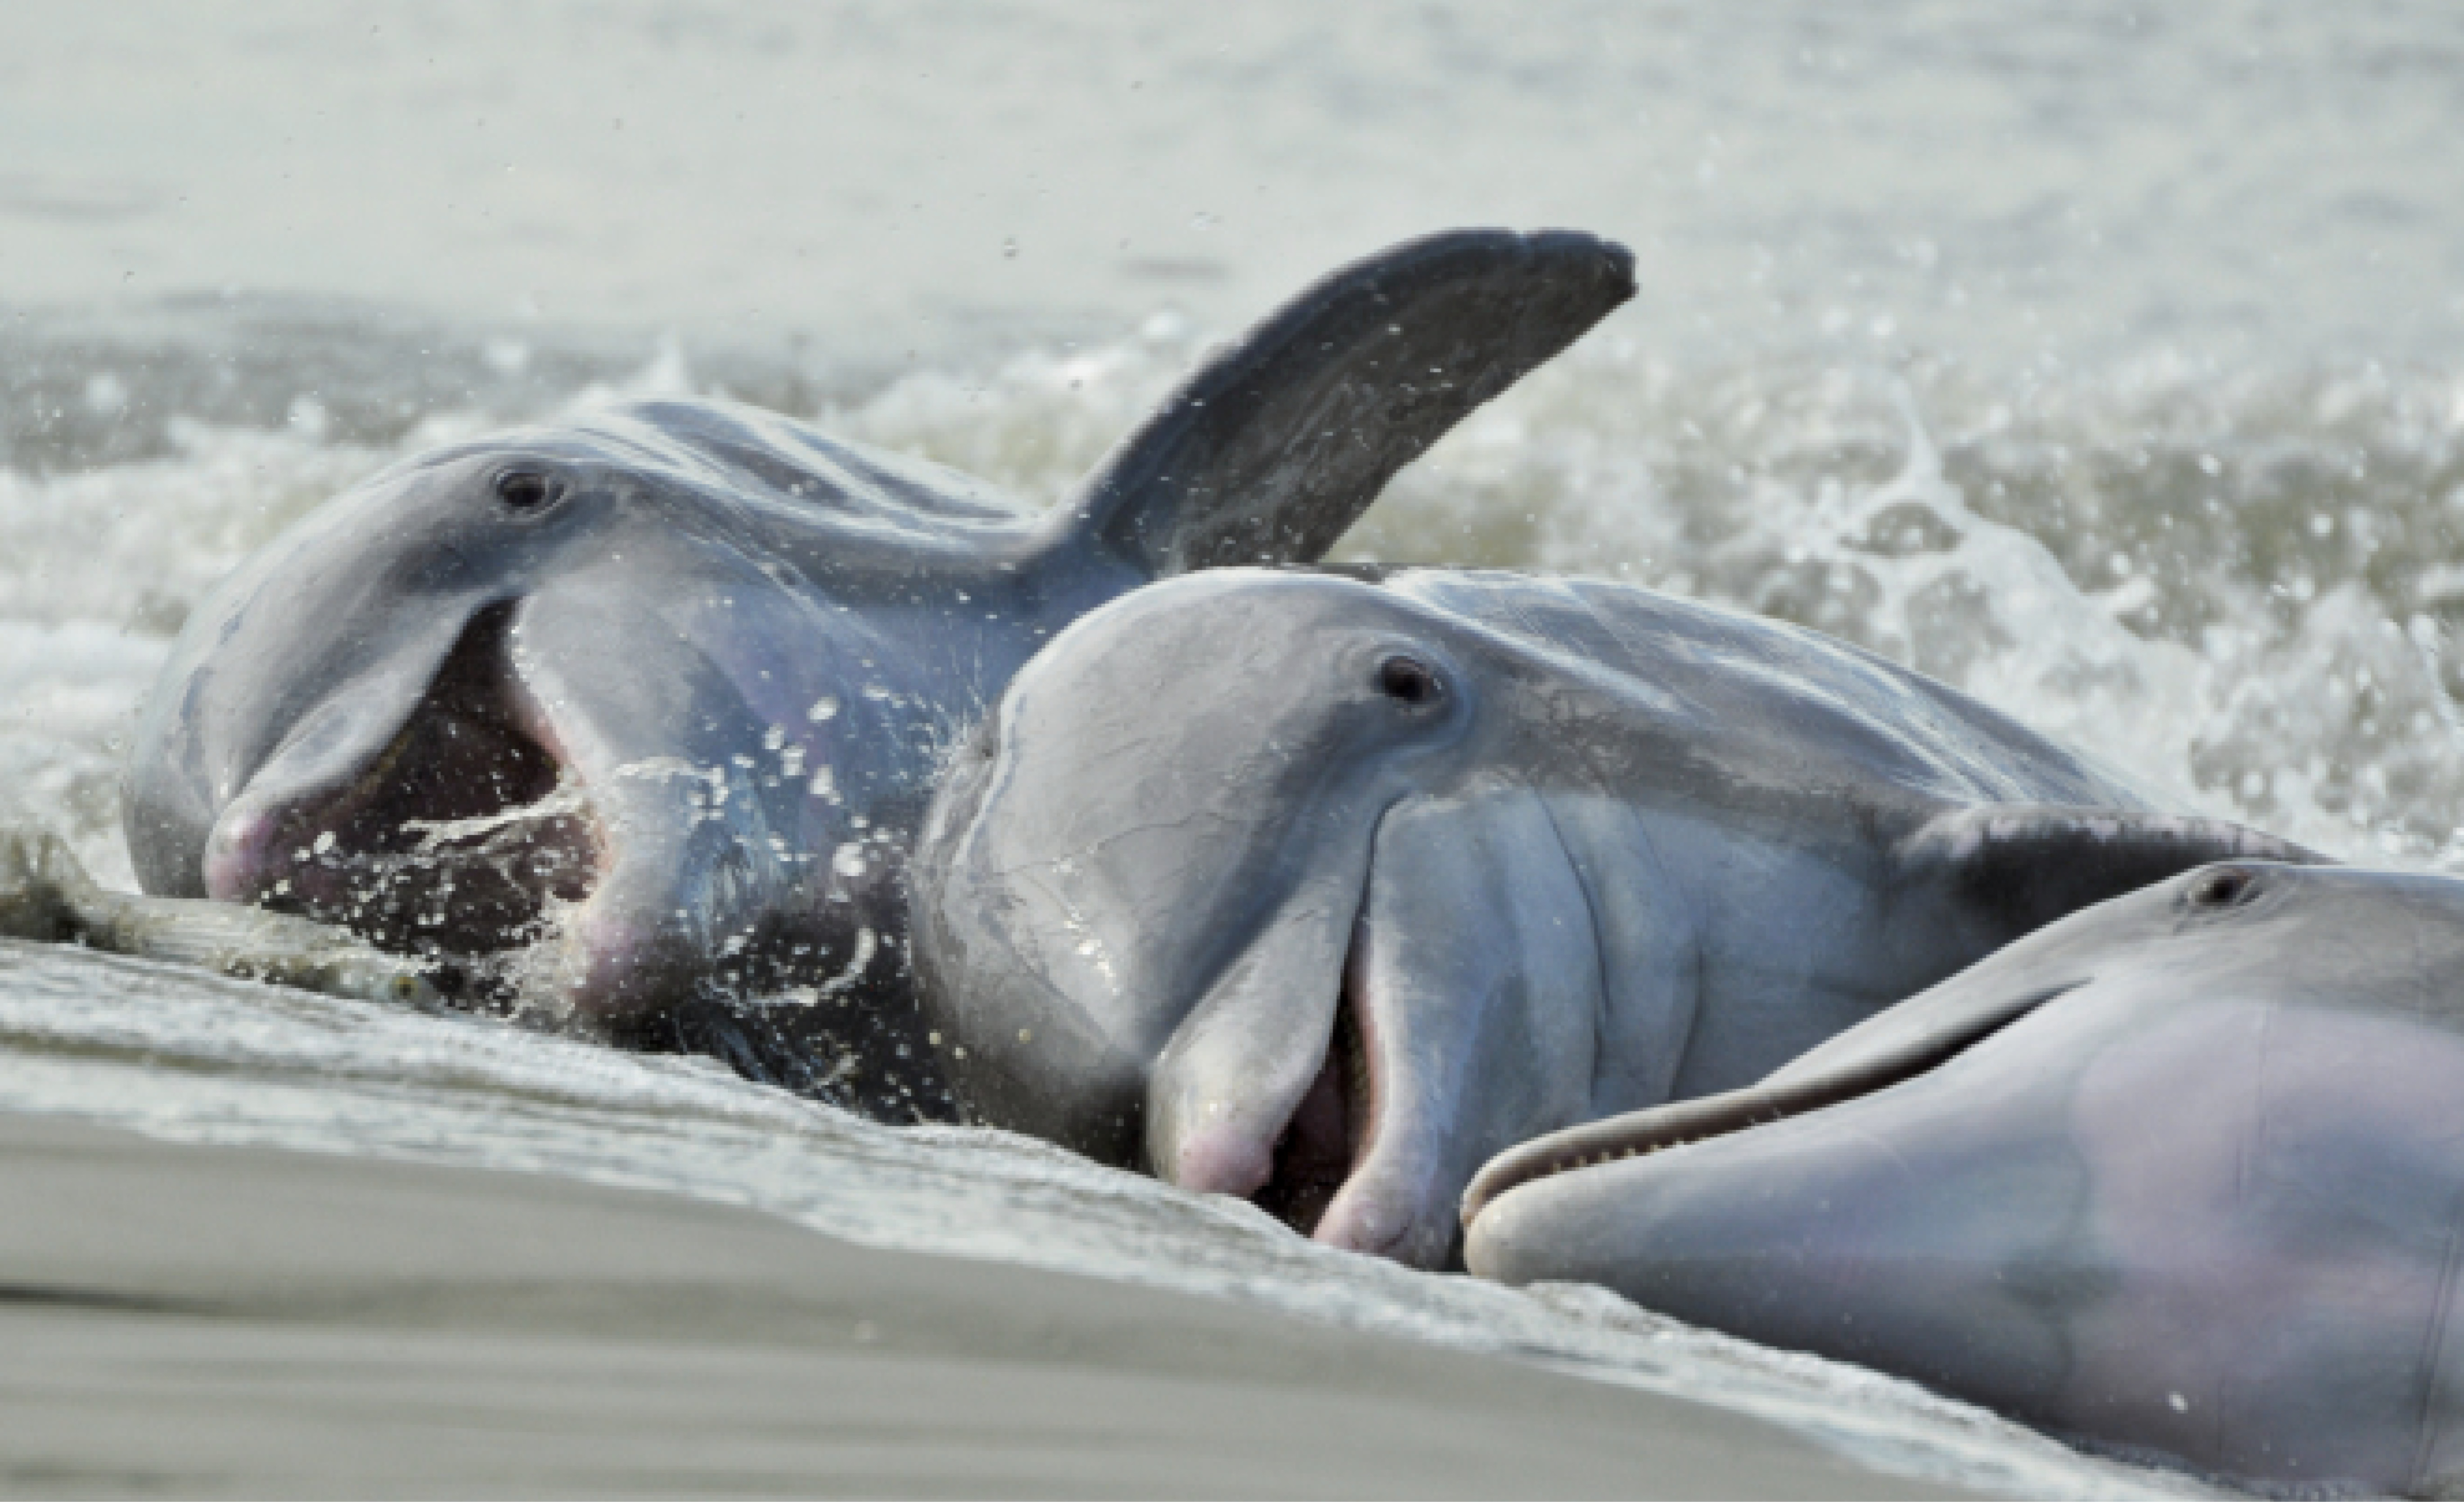 Alfresco Dining: Some of Charleston’s Atlantic bottlenose dolphins are known for a unique, learned behavior called “strand feeding,” which entails herding fish onto a bank, then momentarily “stranding” themselves on shore to catch their dinner.